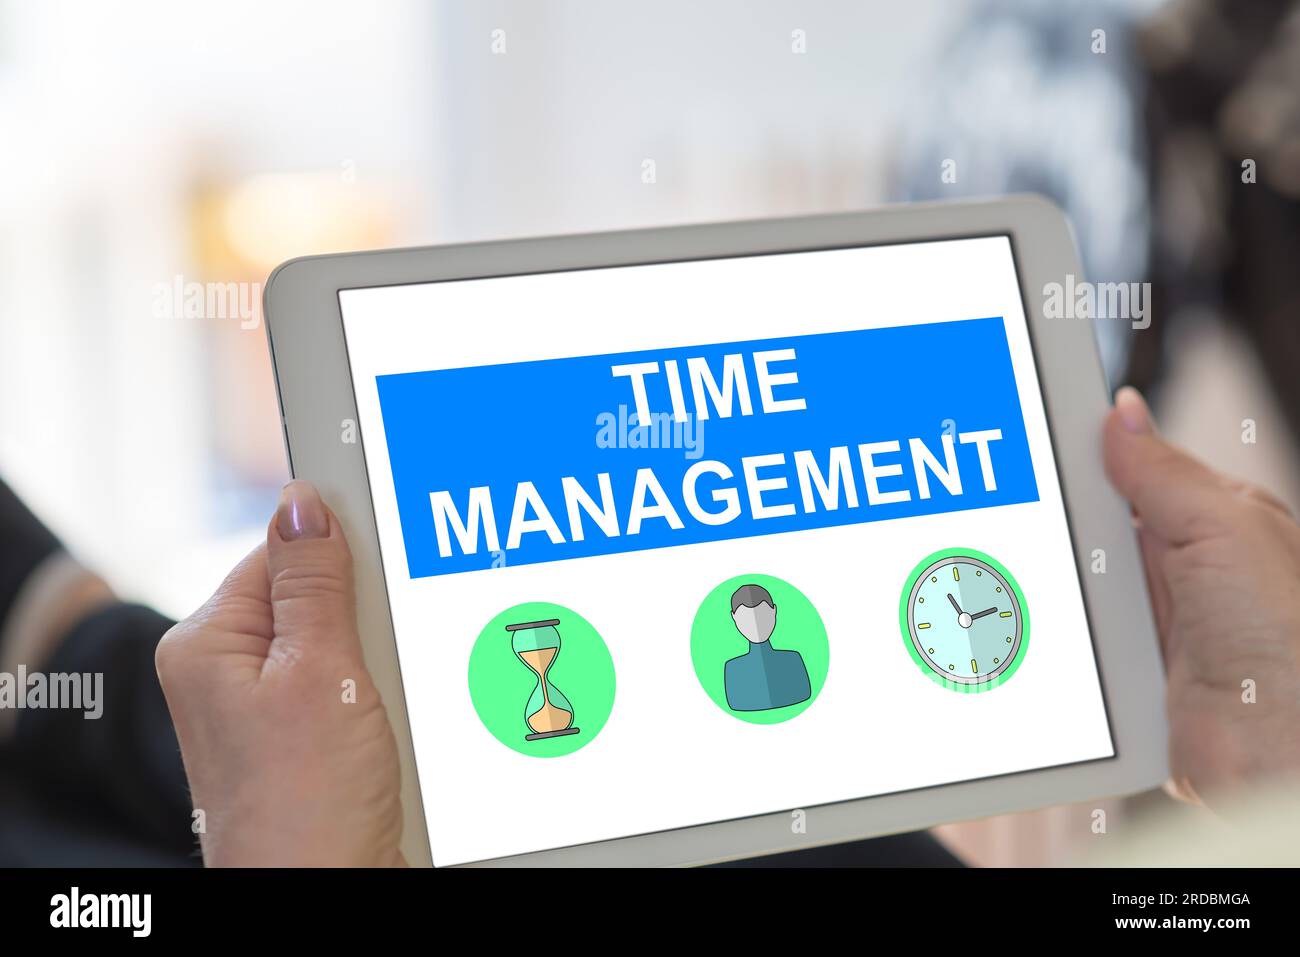 Tablet screen displaying a time management concept Stock Photo